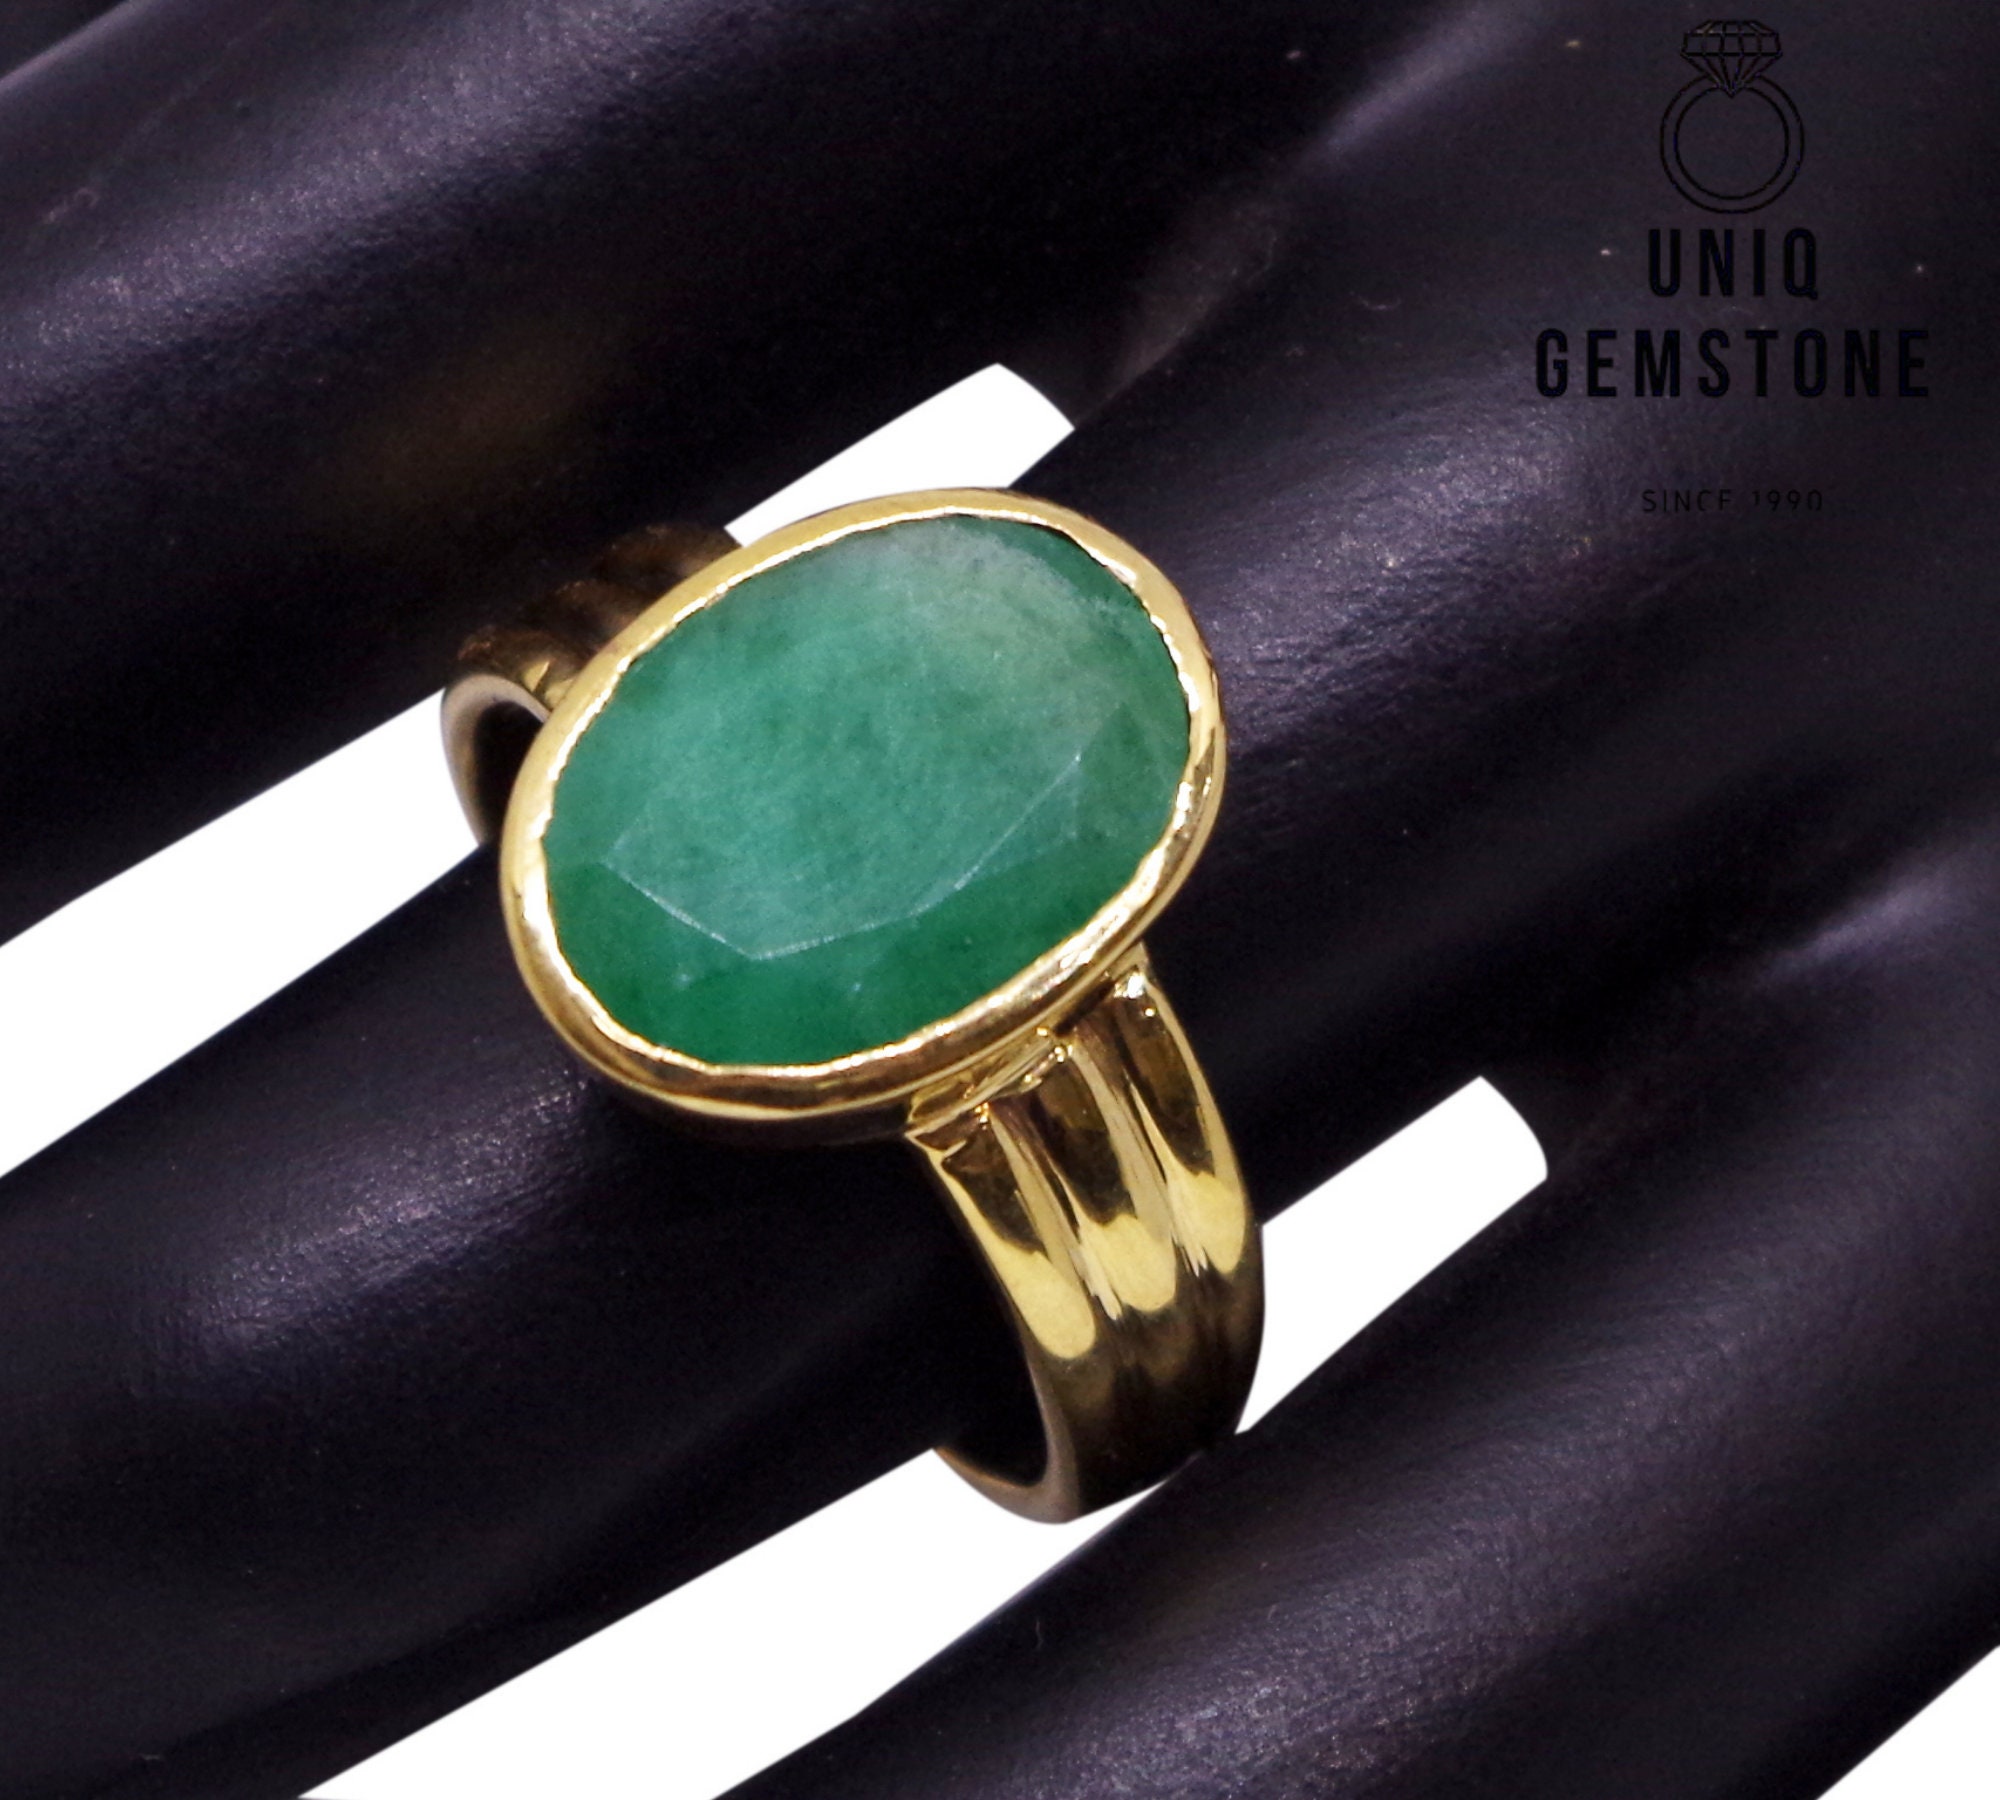 Emerald (Panna) Ring with Diamond and Gold at Rs 1405550.00 | Emerald Rings  in Gurgaon | ID: 10737742488